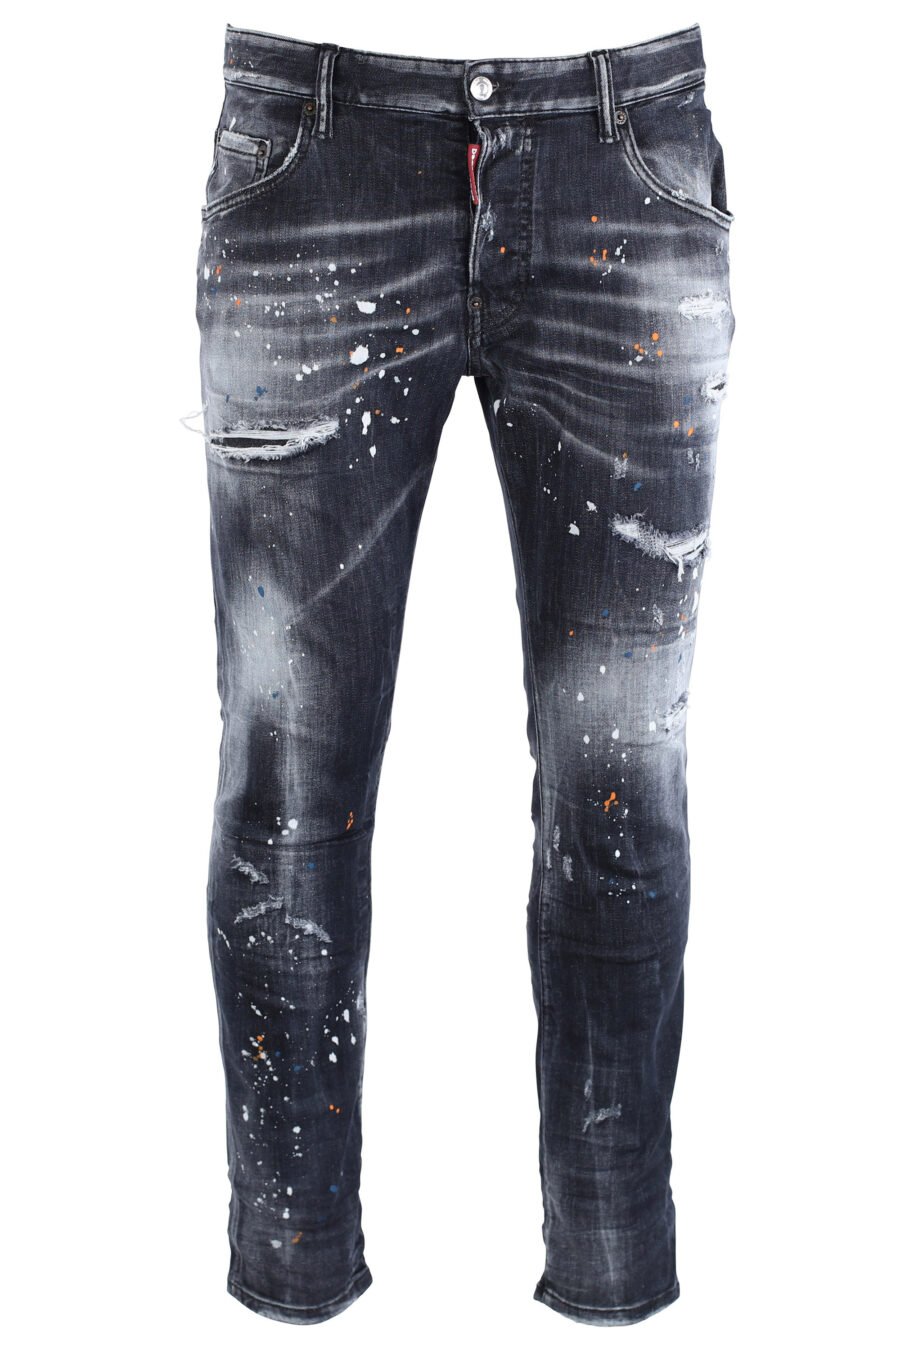 Black "skater jean" jeans with rips - IMG 1608